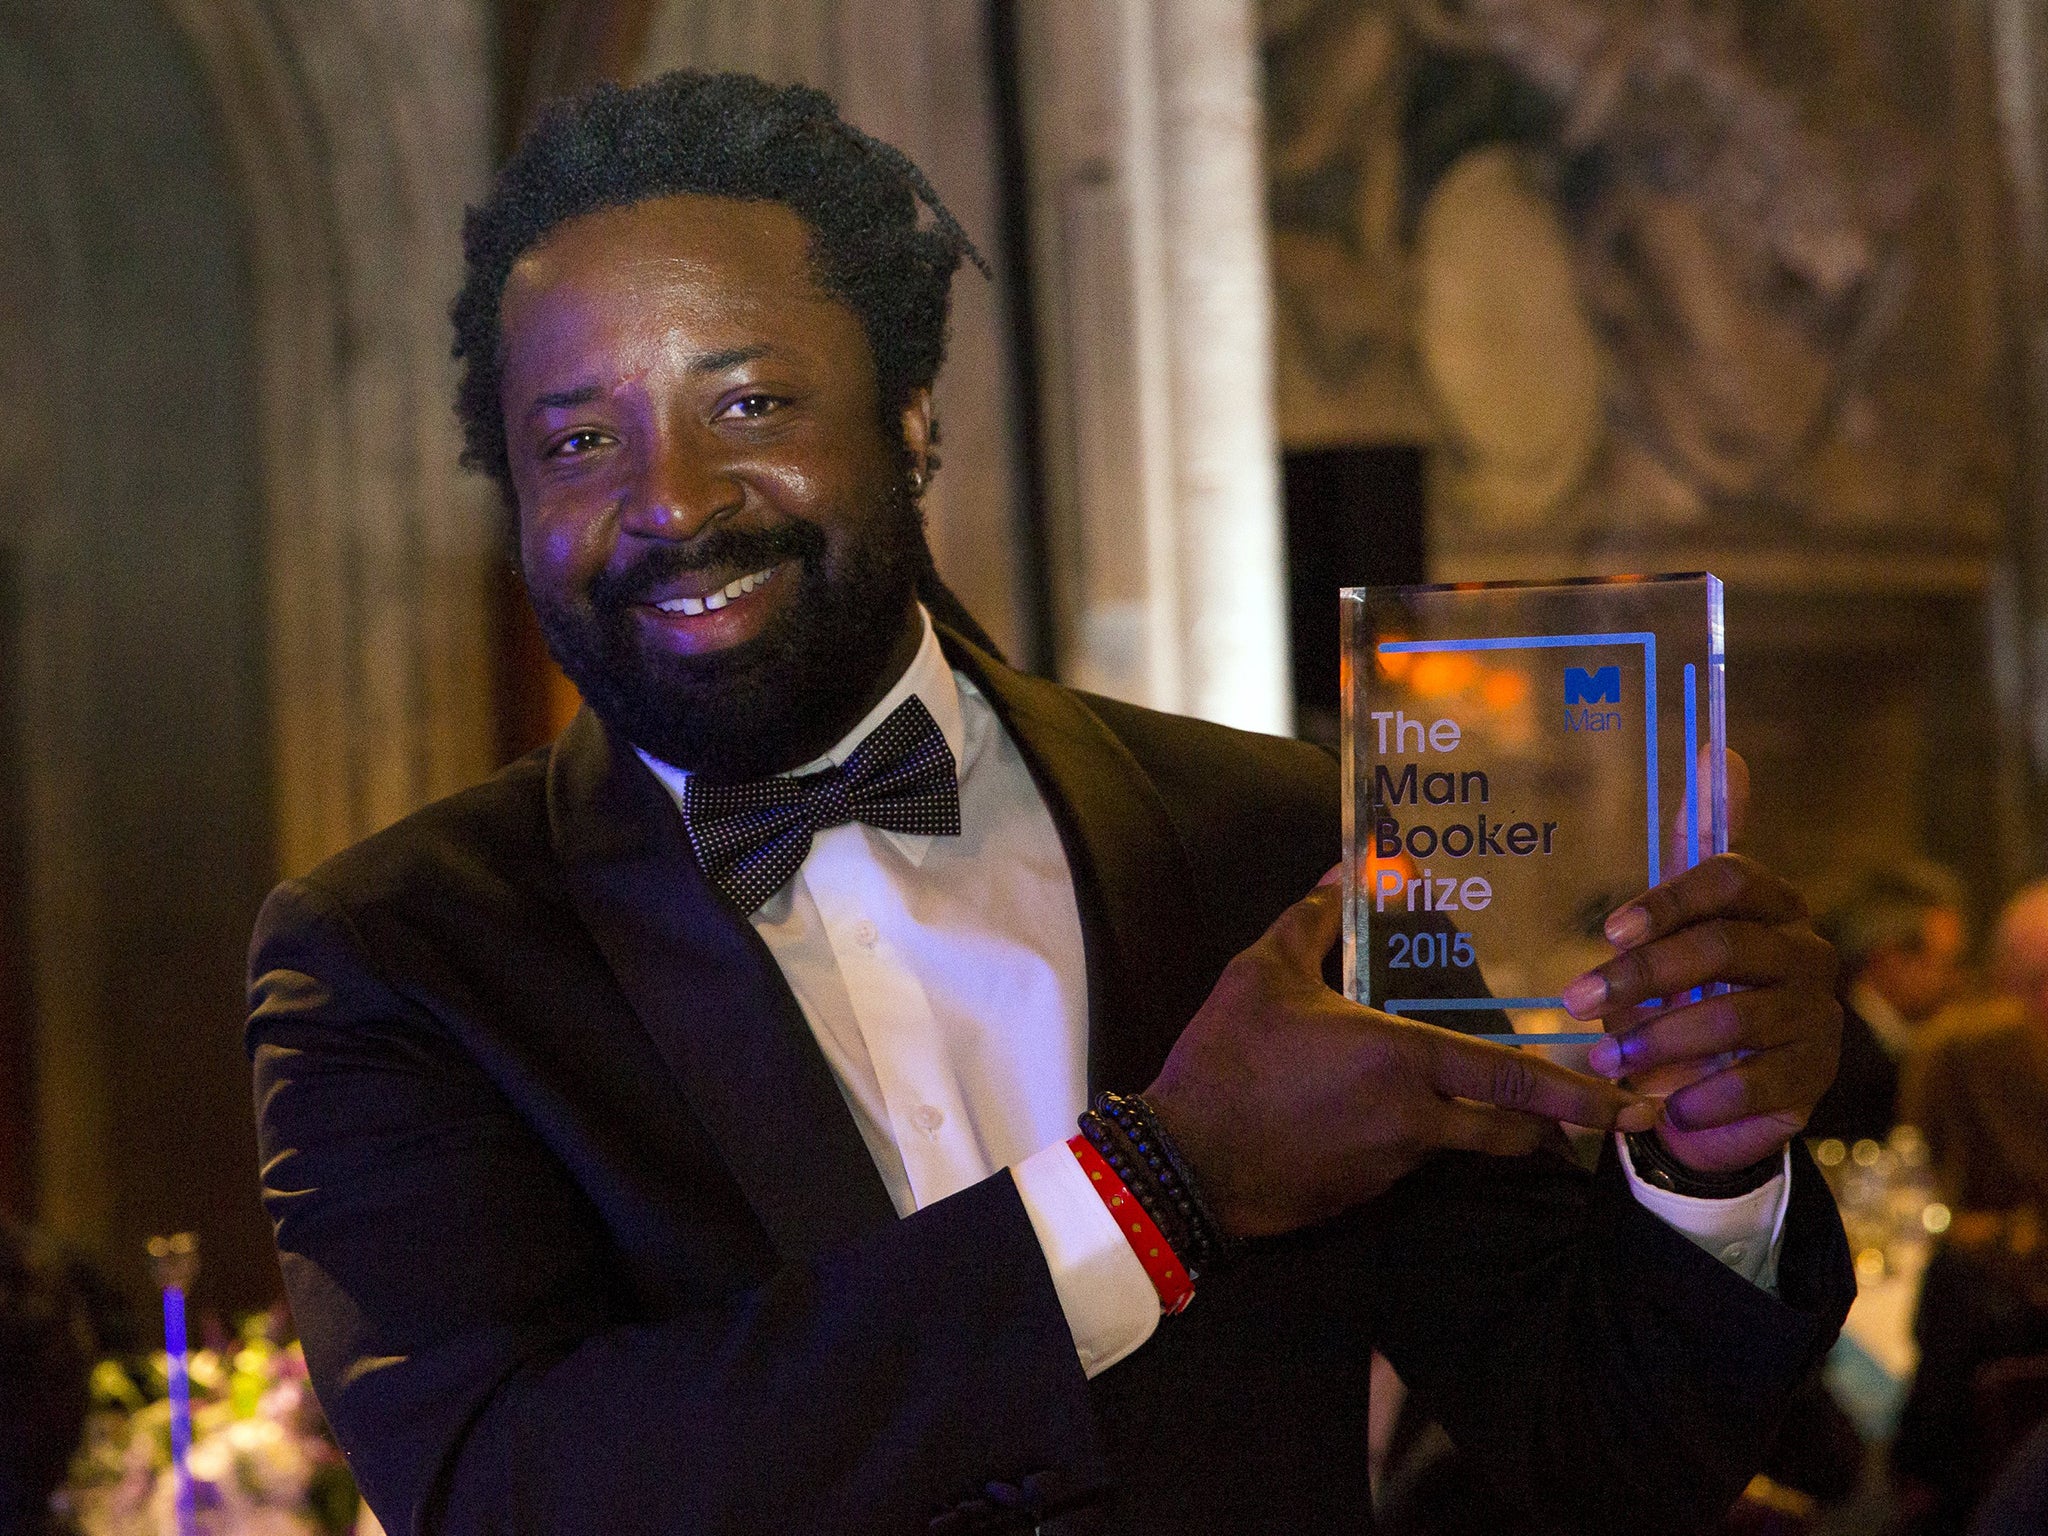 Author Marlon James winning author of "A Brief History of Seven Killings", poses with his award at the ceremony for the Man Booker Prize for Fiction 2015 at The Guildhall in London